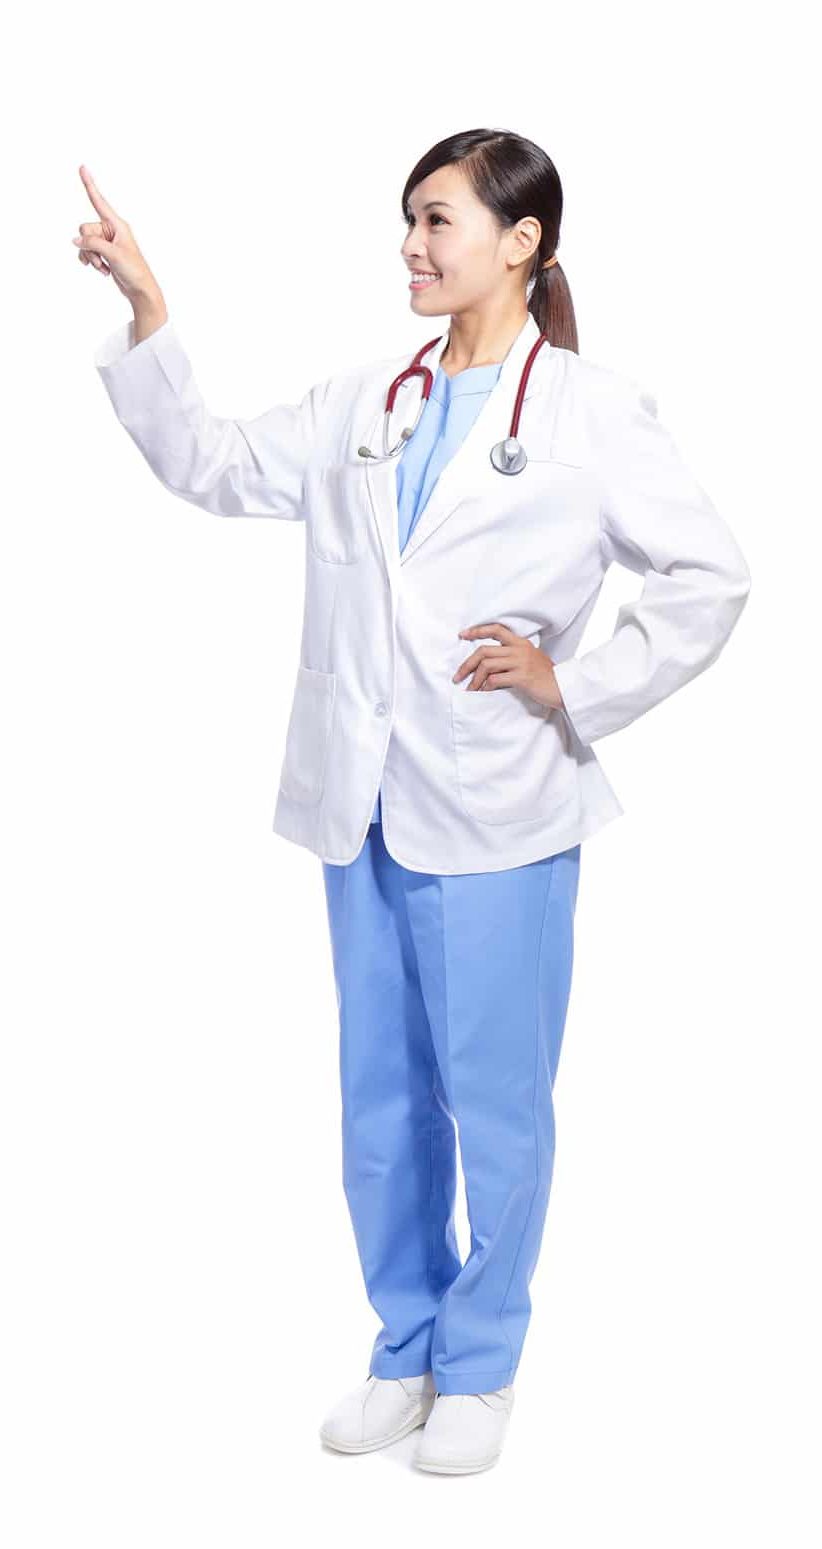 A doctor in scrubs and a lab coat points to the side.